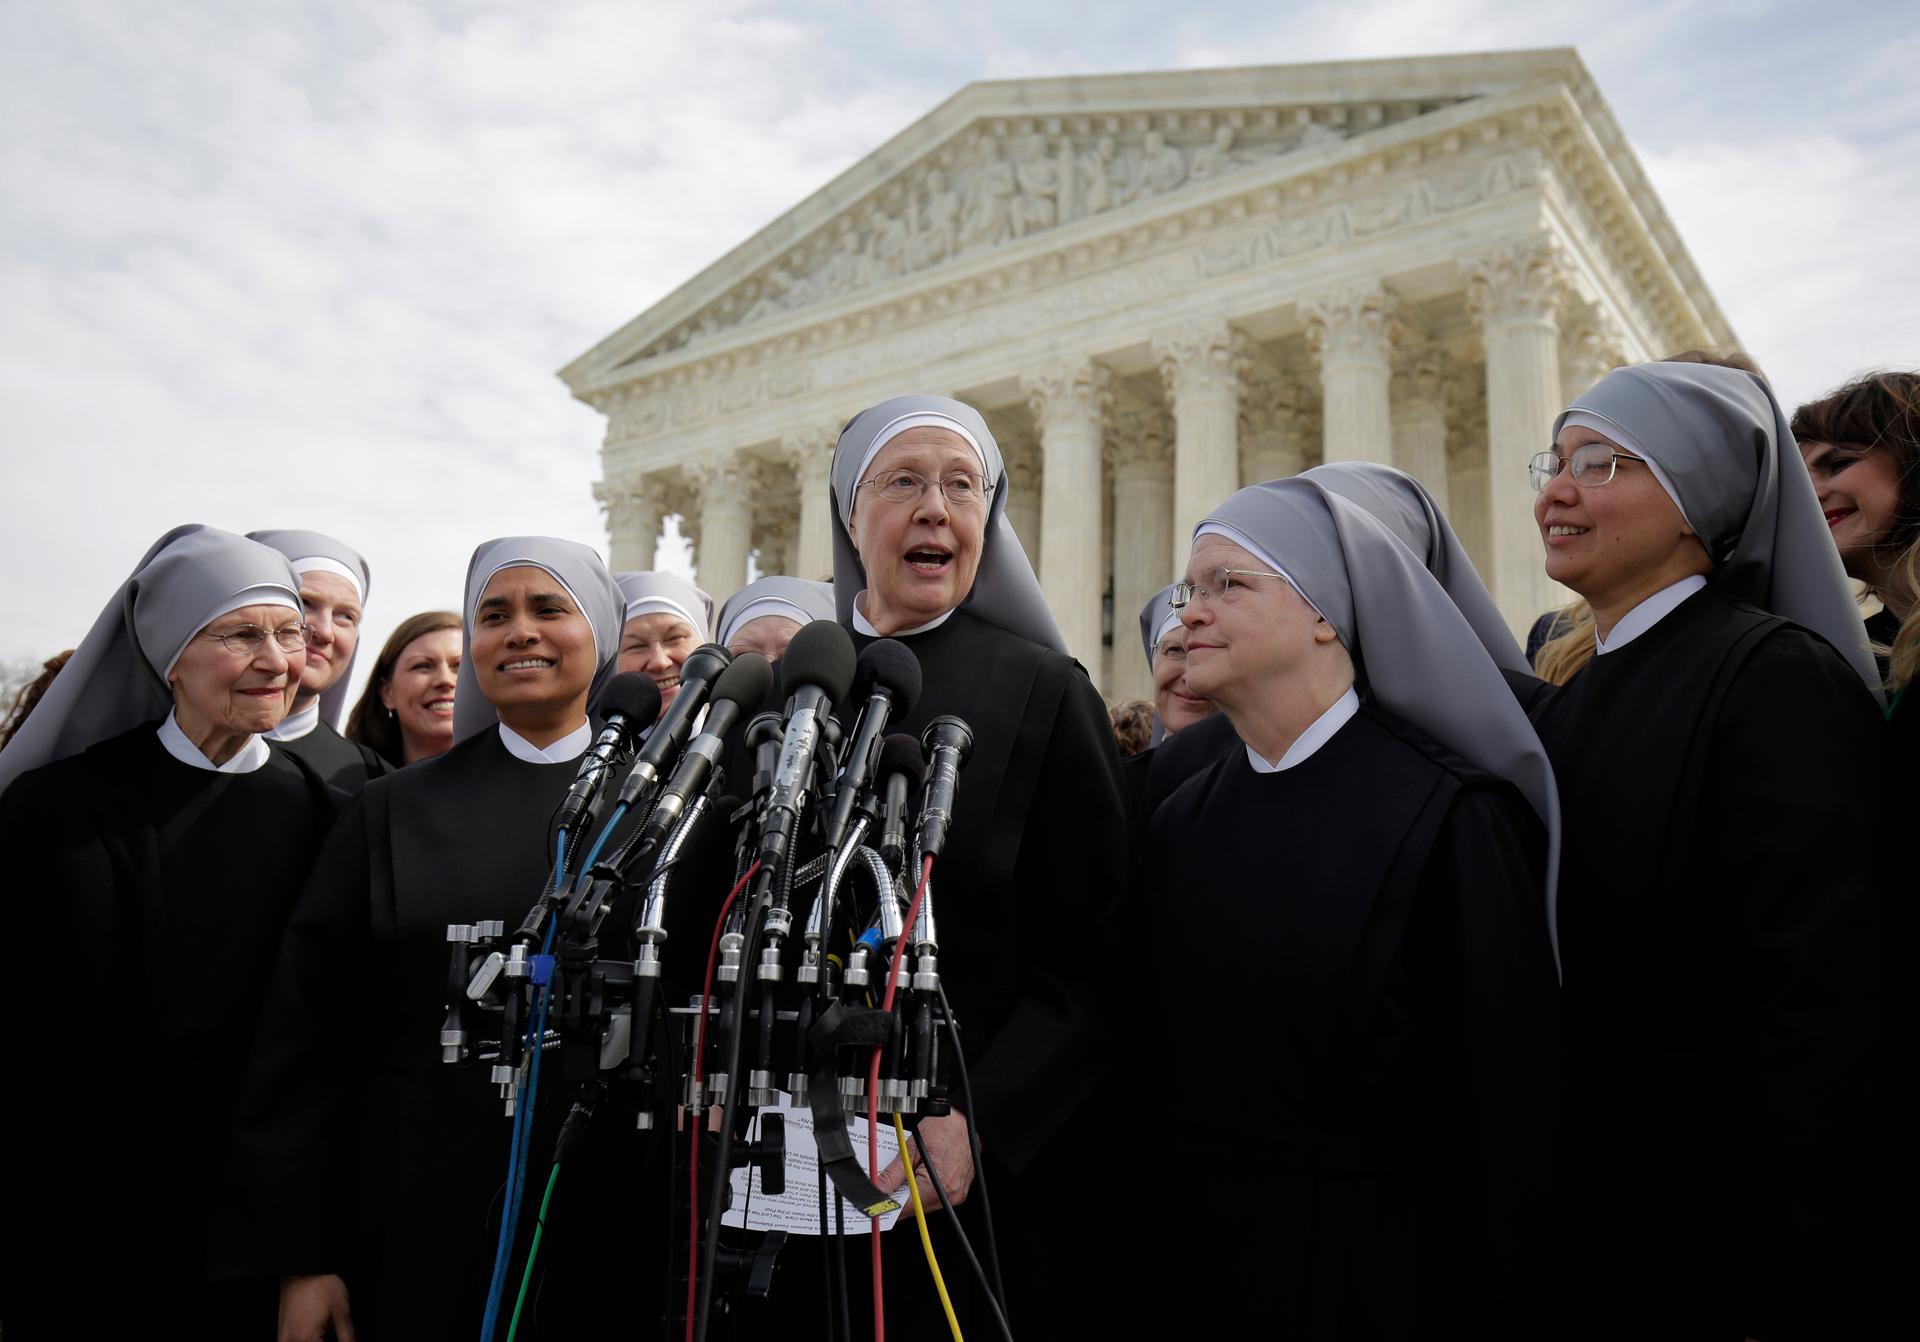 Sister Loraine McGuire with Little Sisters of the Poor speaks to the media after Zubik v. Burwell, an appeal brought by Christian groups demanding full exemption from the requirement to provide insurance covering contraception under the ACA.